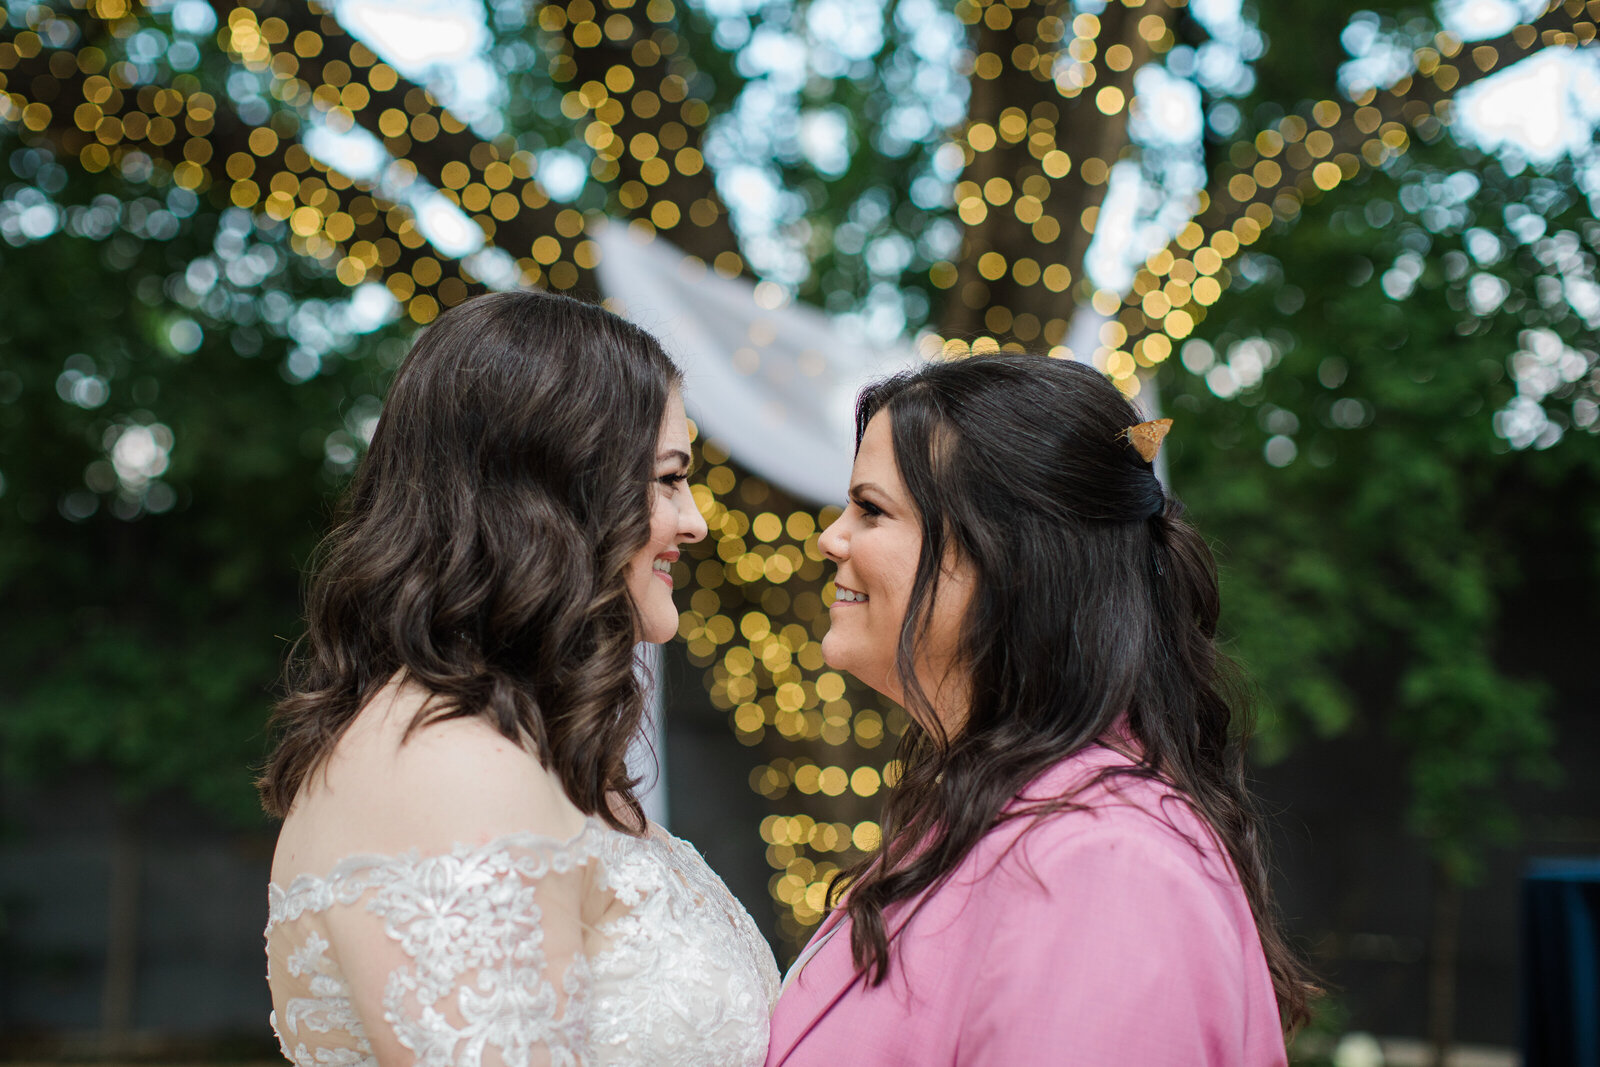 Two brides look at each other in front of a big oak tree covered in twinkle lights at Artspace111 venue in Fort Worth, Texas. The bride on the left is wearing a long sleeve lace white dress. The bride on the right is in a pink suit. They both have brown hair, and the bride with the pink suit has an orange monarch butterfly in her hair.